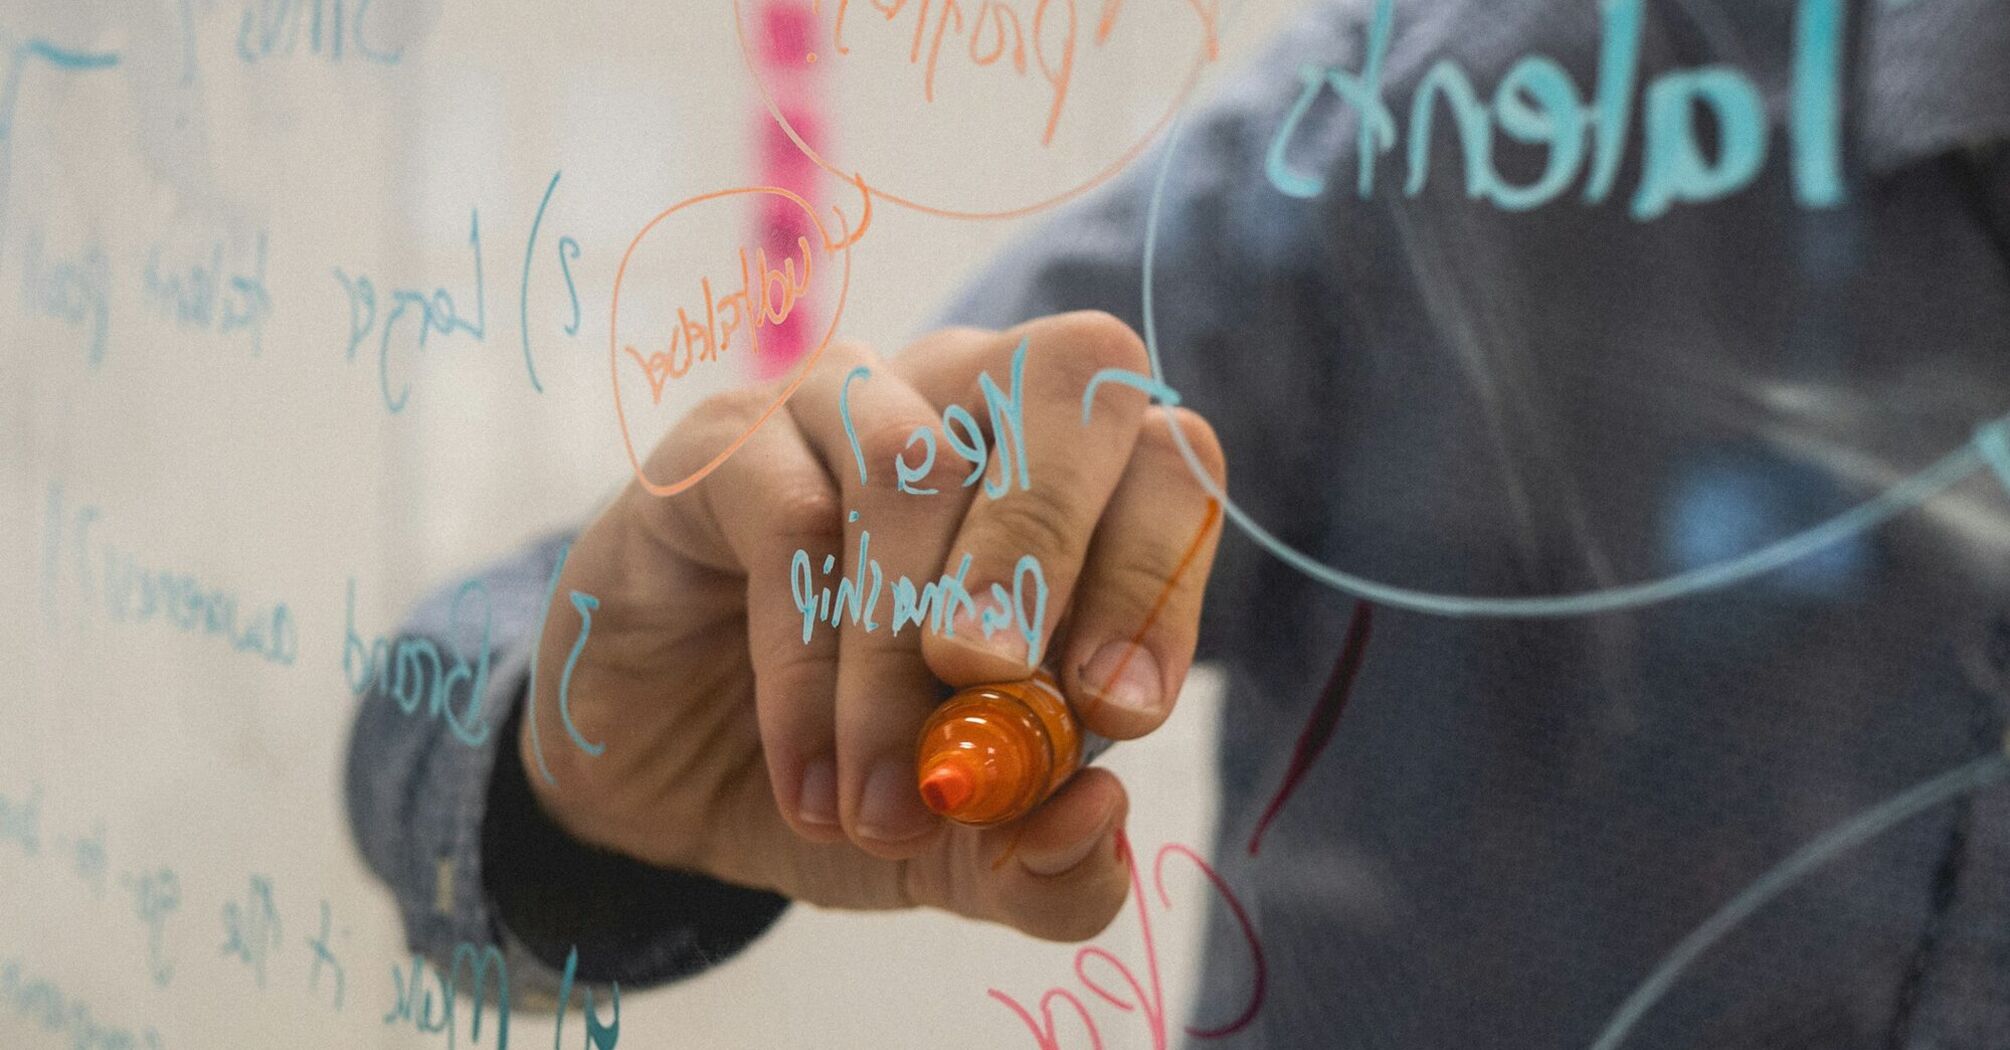 A person writing on a clear board with a marker, with various words and diagrams visible in the background